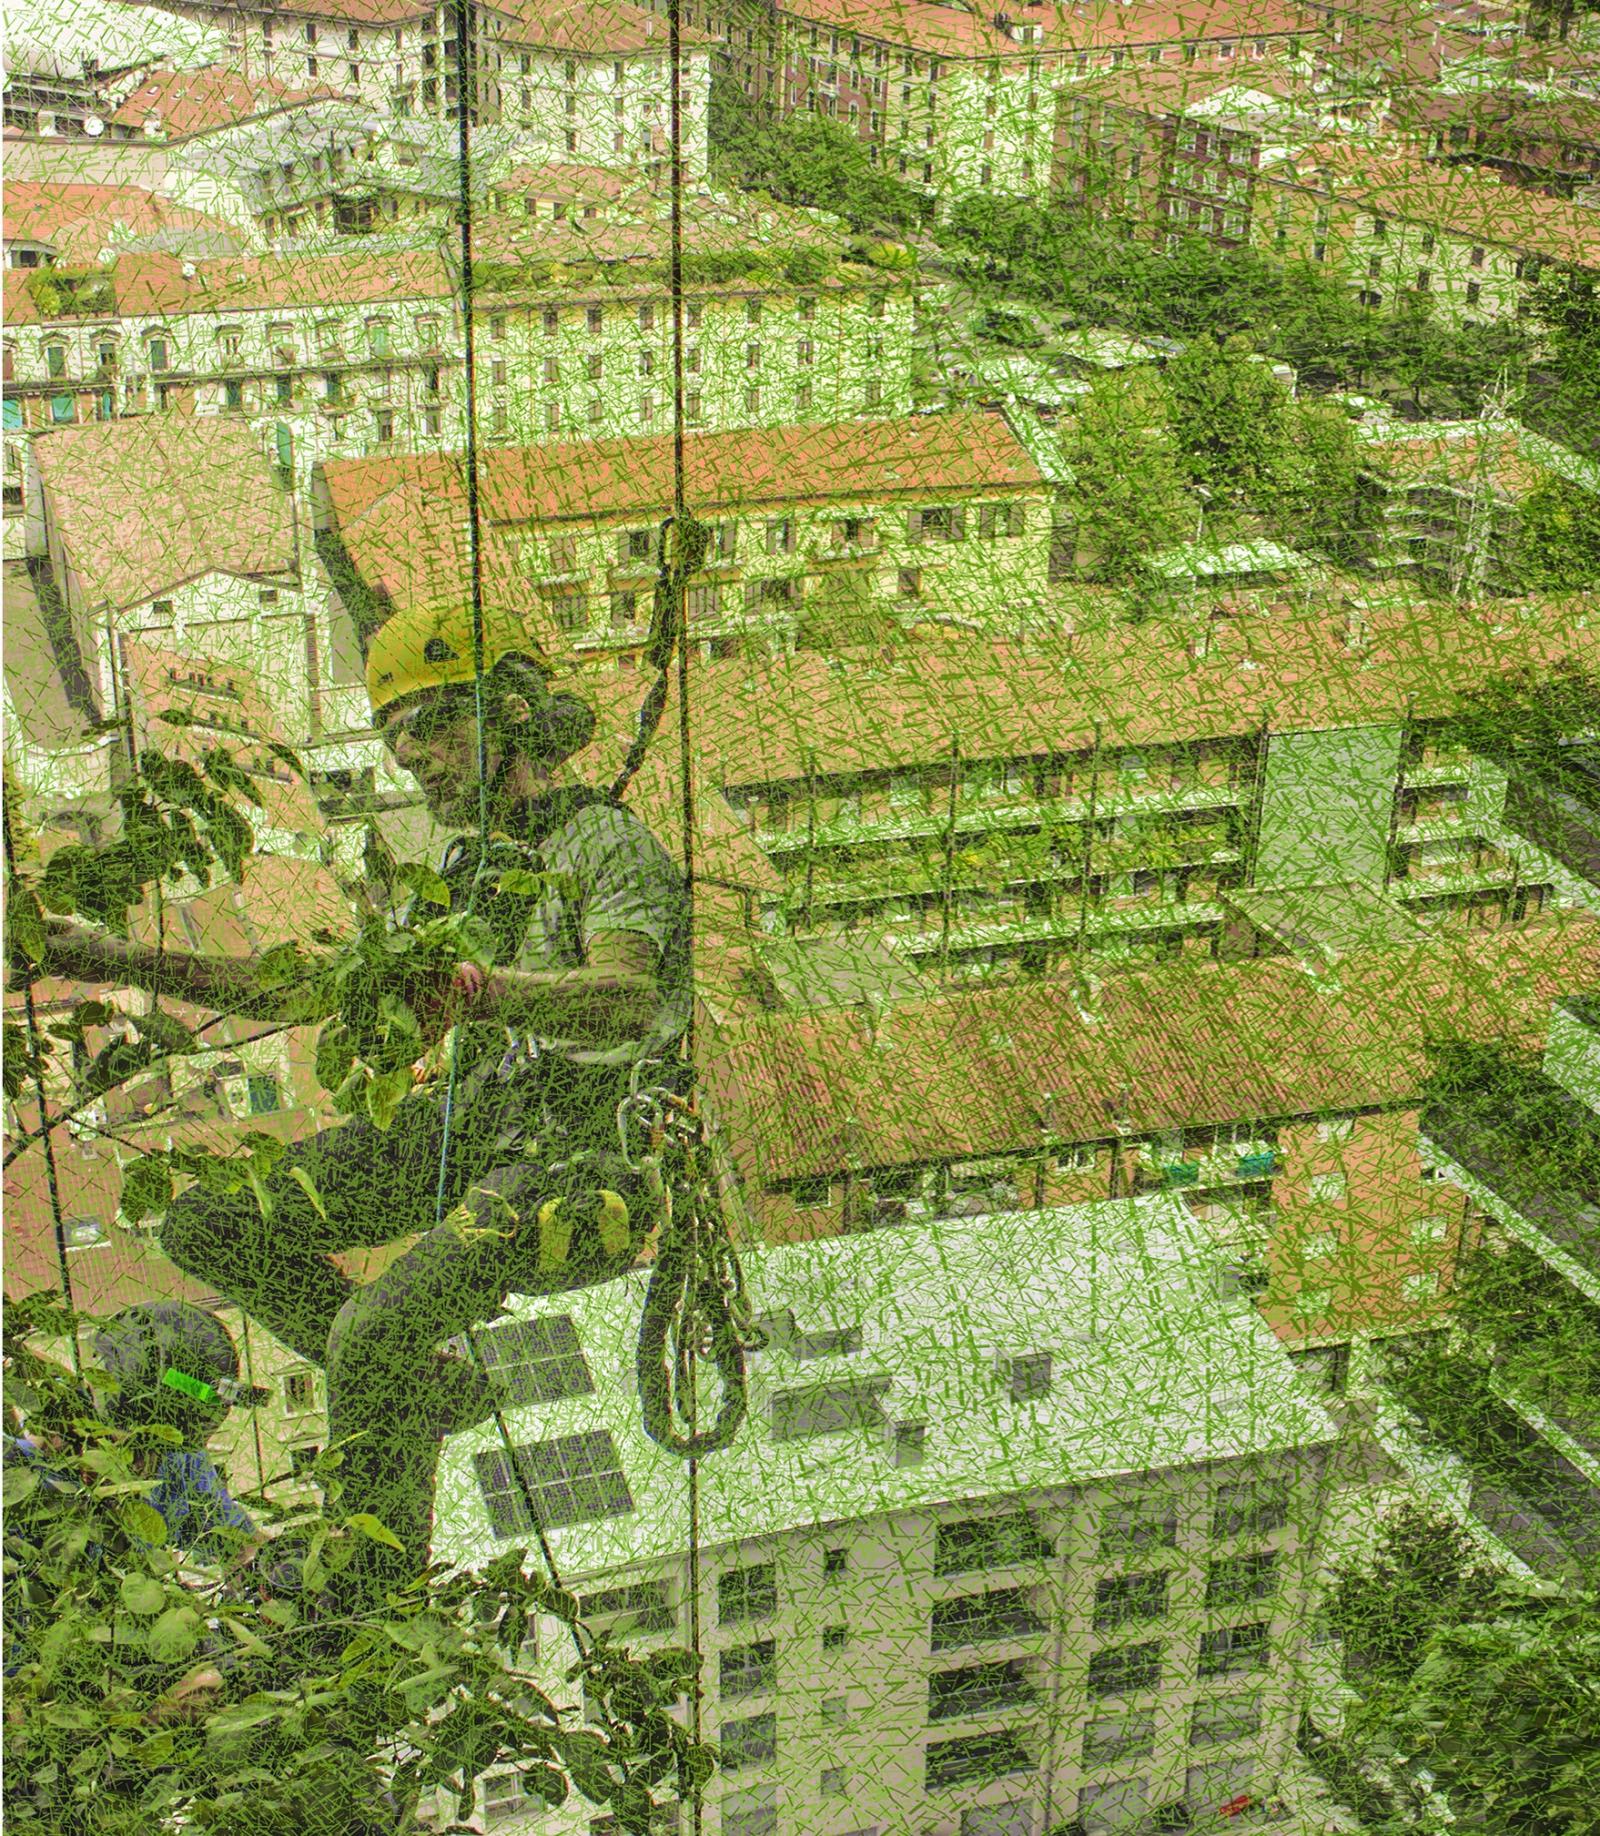 Bird eye view of greenery between buildings and a man tending to the greenery.